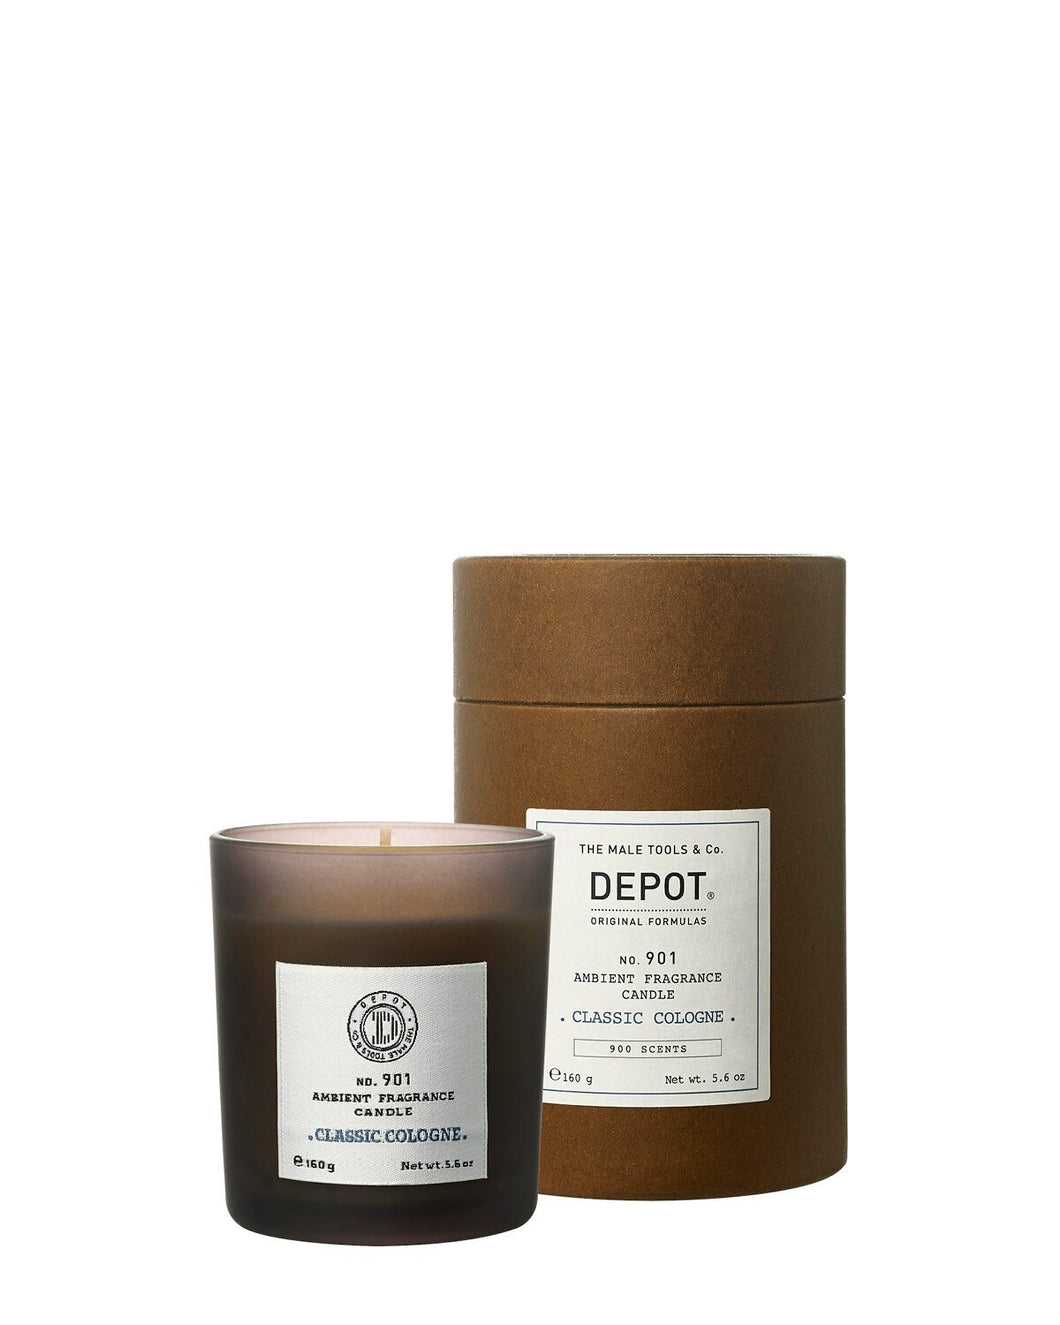 Depot- Ambient Fragrance Candle 901